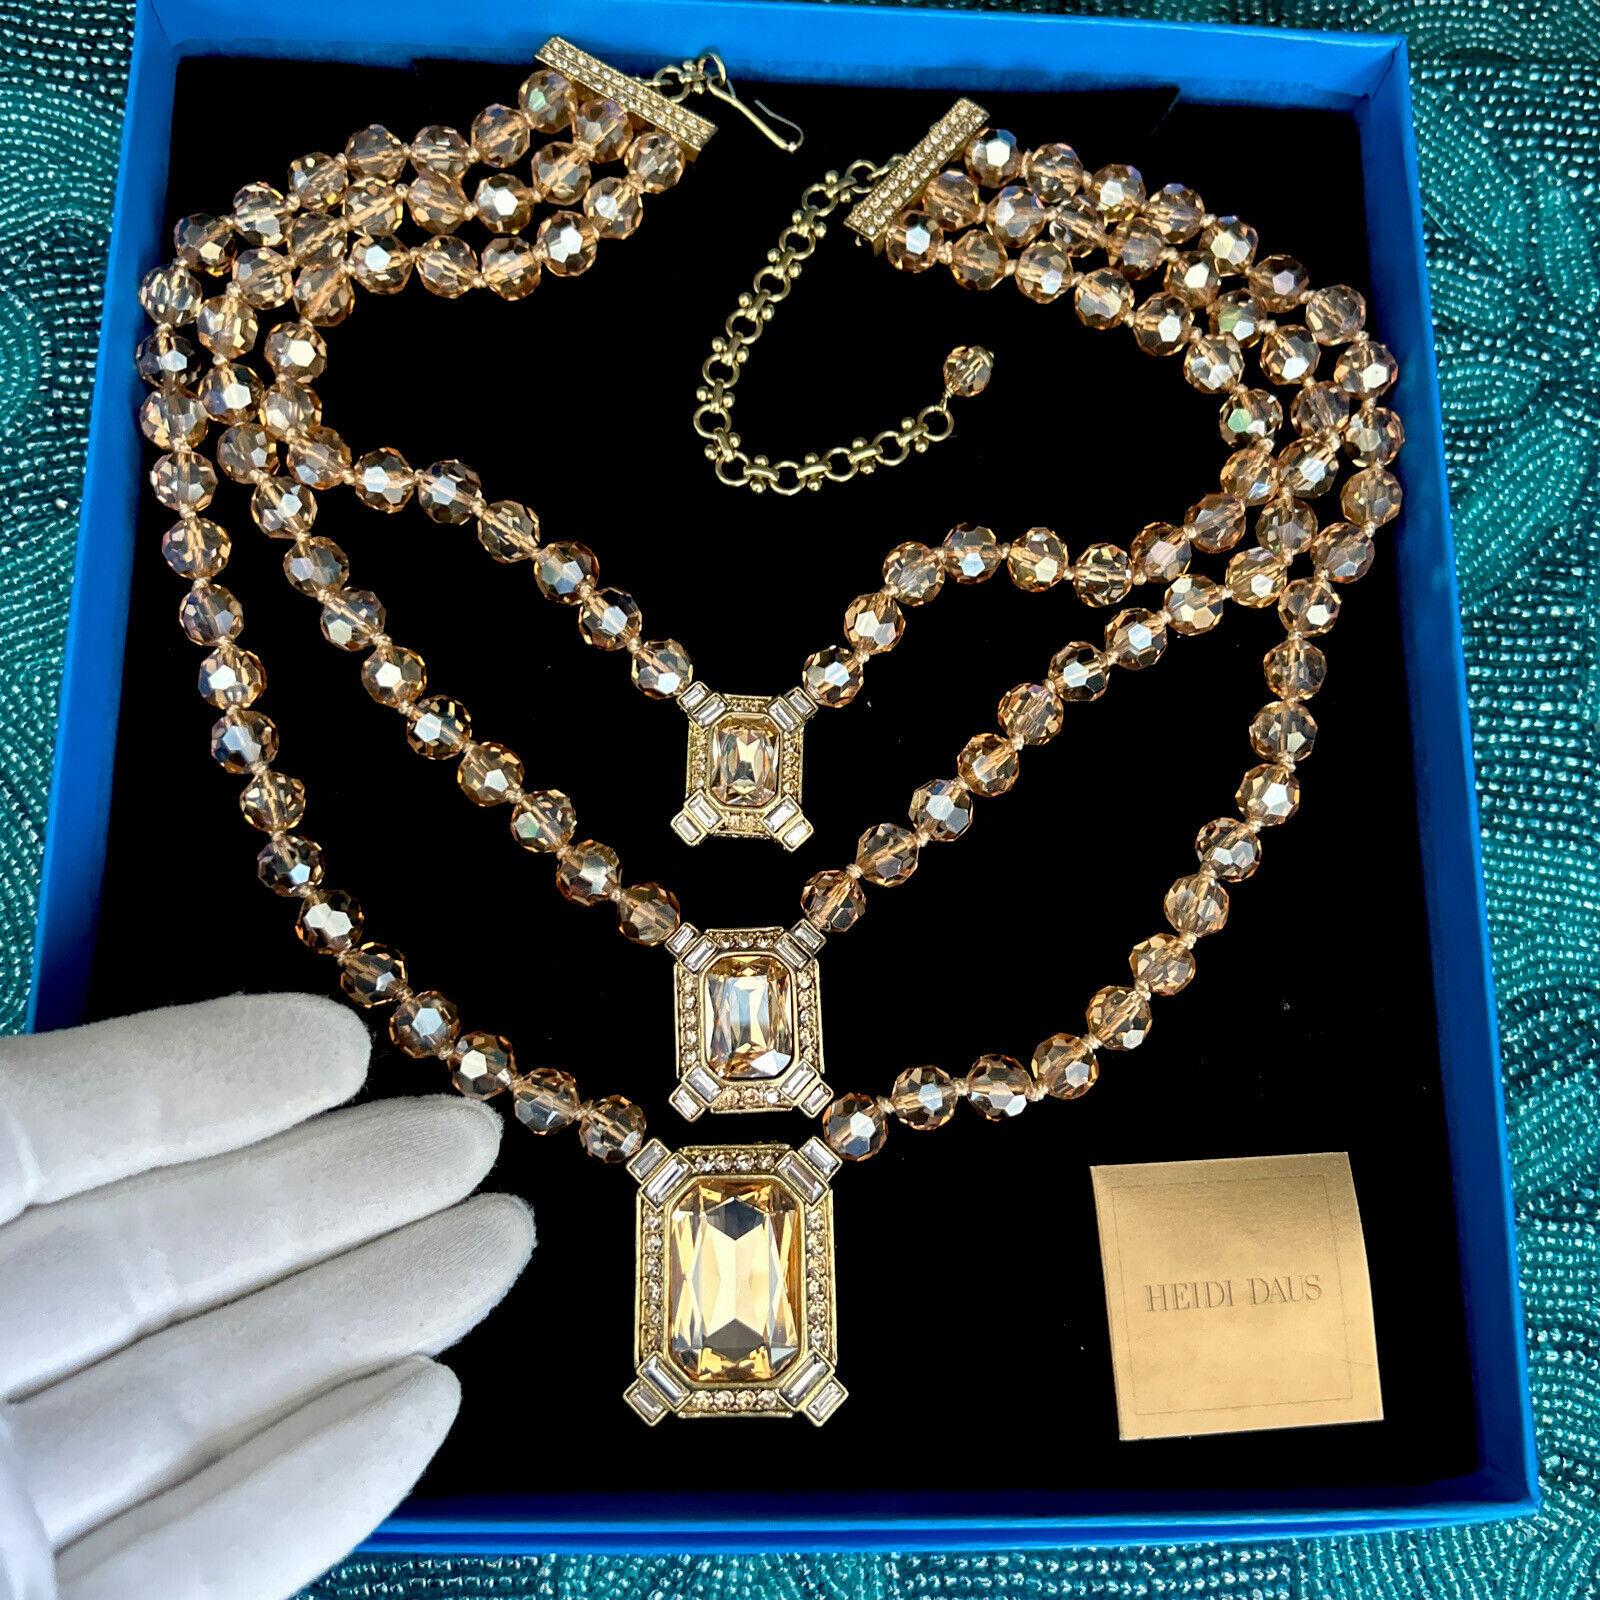 Simply Beautiful! Rare Heidi Daus Designer Triple Strand Golden Crystal Necklace. Each strand individually Hand Knotted Champagne colored faceted Beads features a Sparkling Crystal Pendant a rectangular Champagne Crystal, hand set  in Gold tone